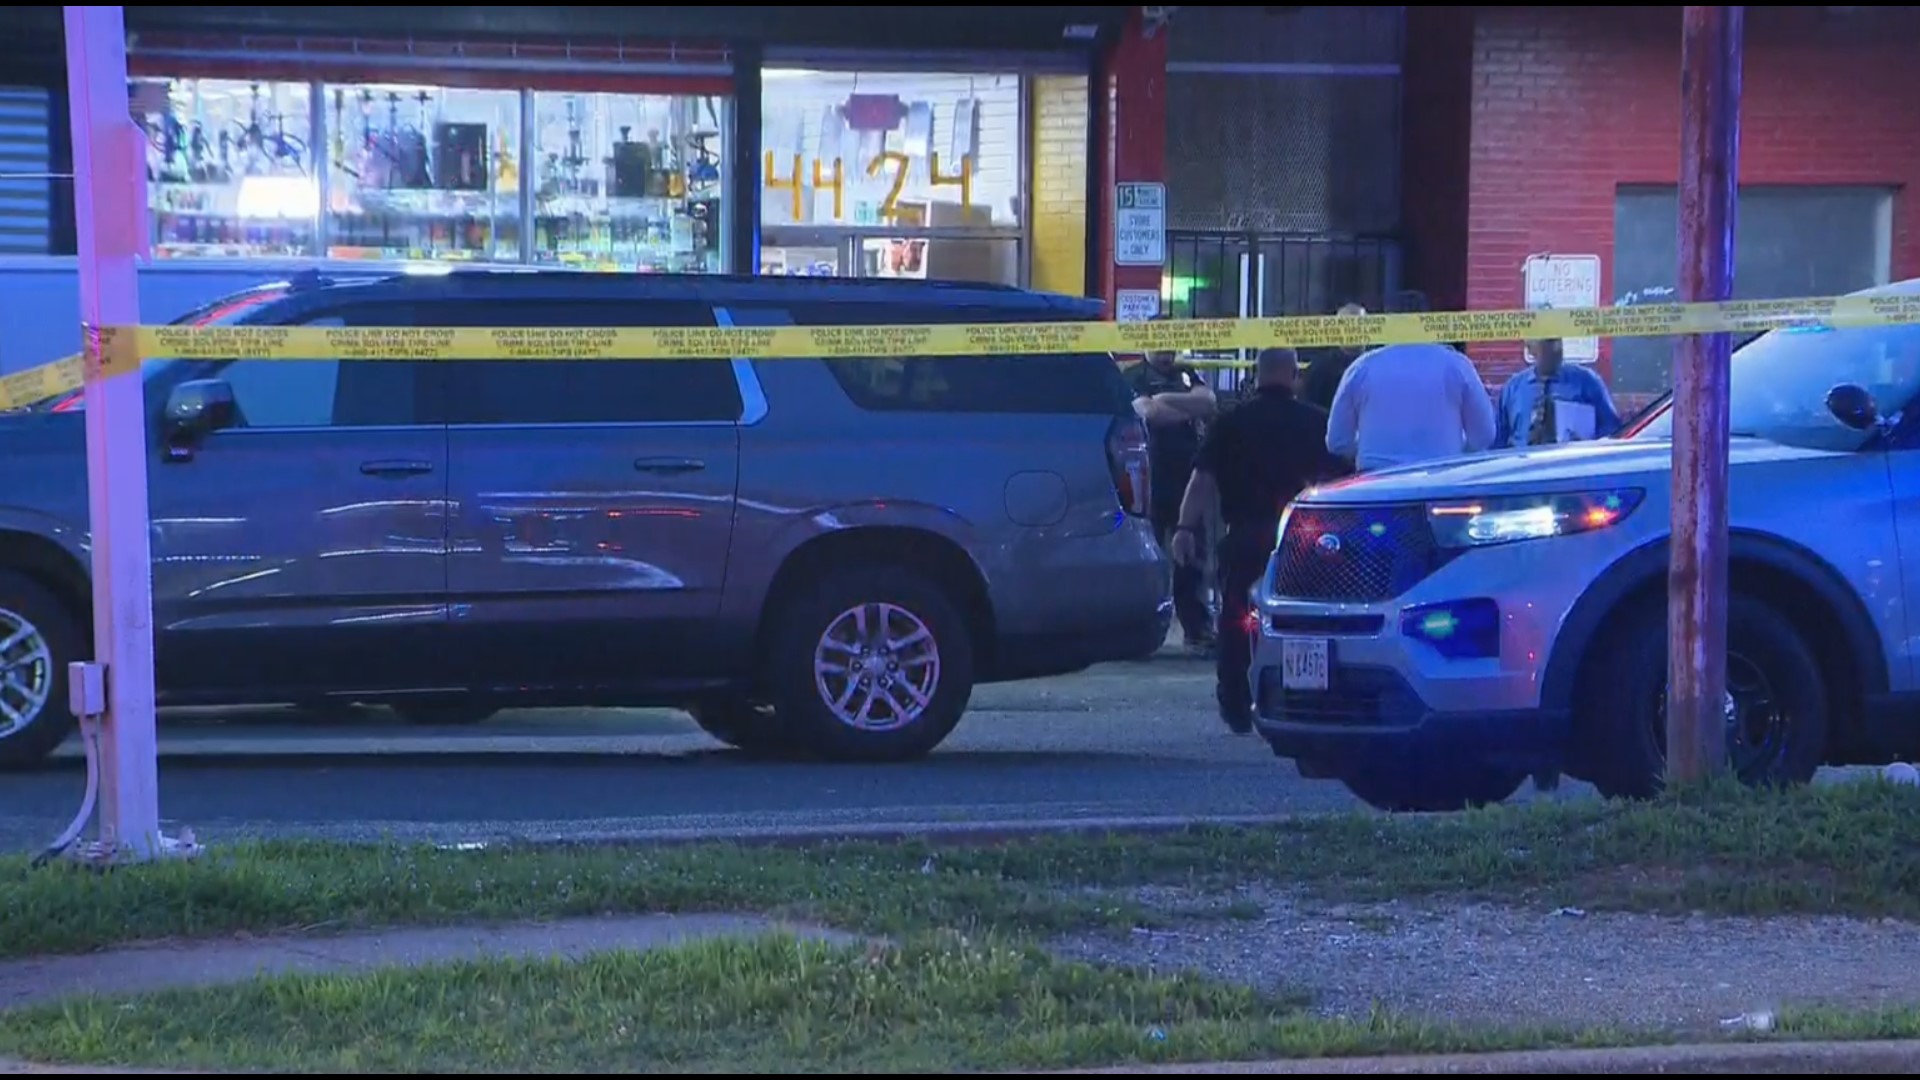 PGPD confirmed to WUSA9 that the store was open at the time of the shooting.